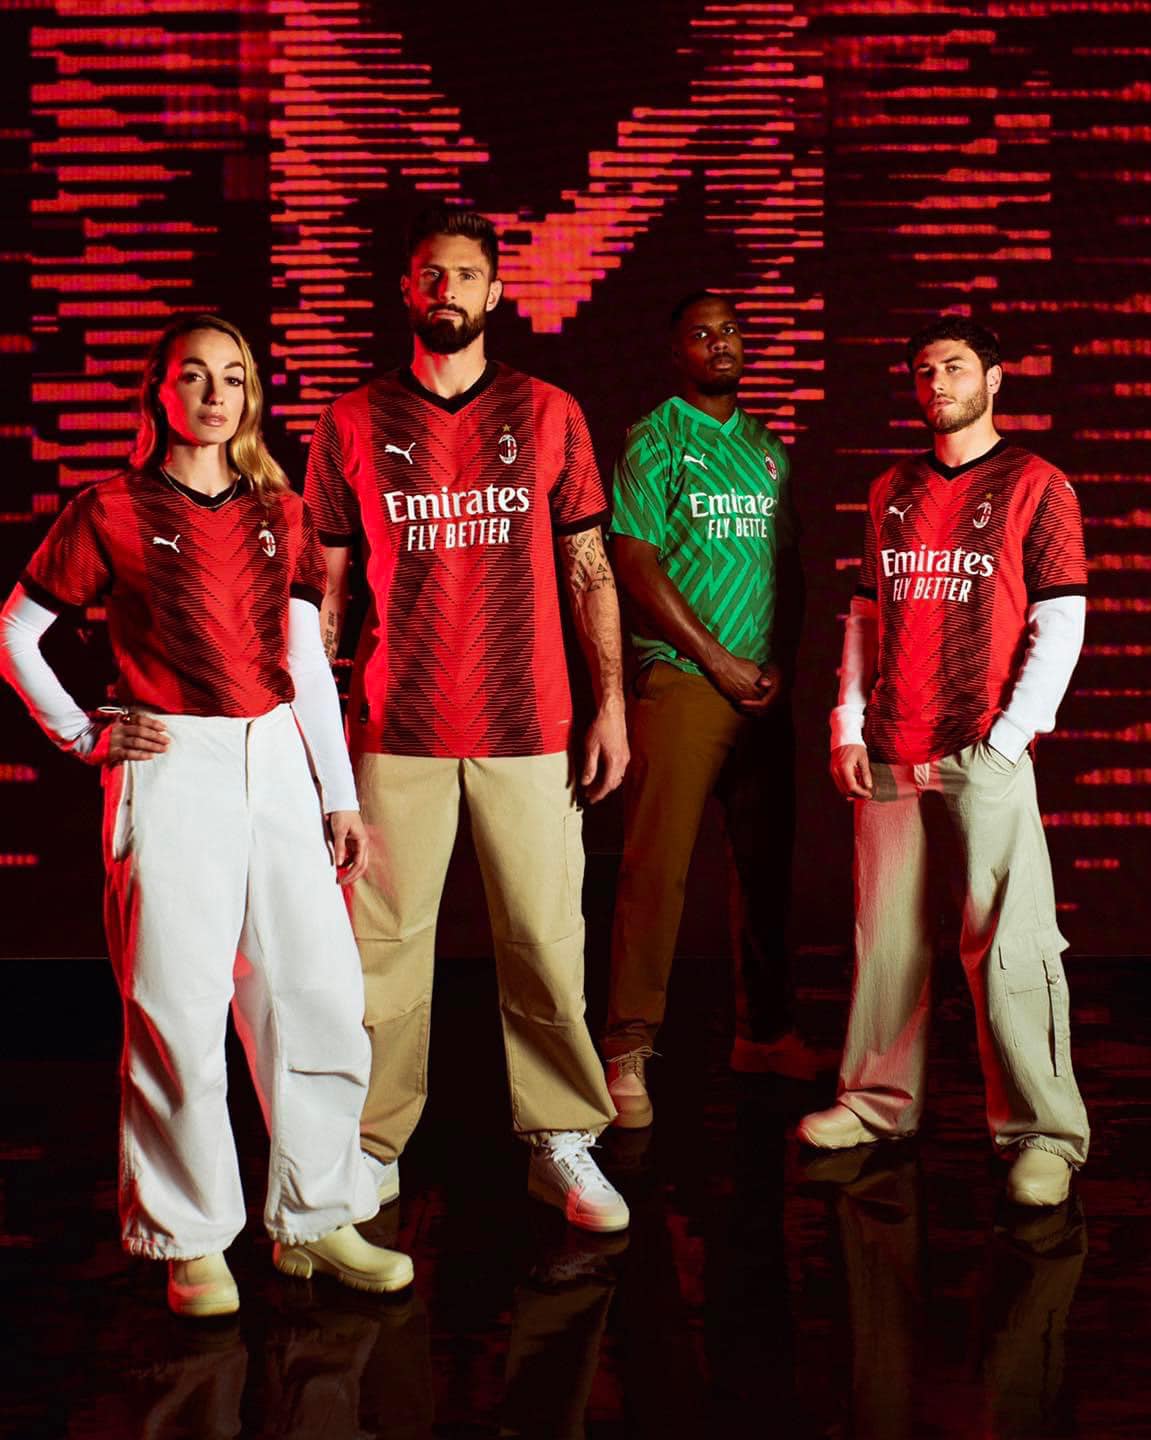 Milan new home kits are fresh and totally newly designed version